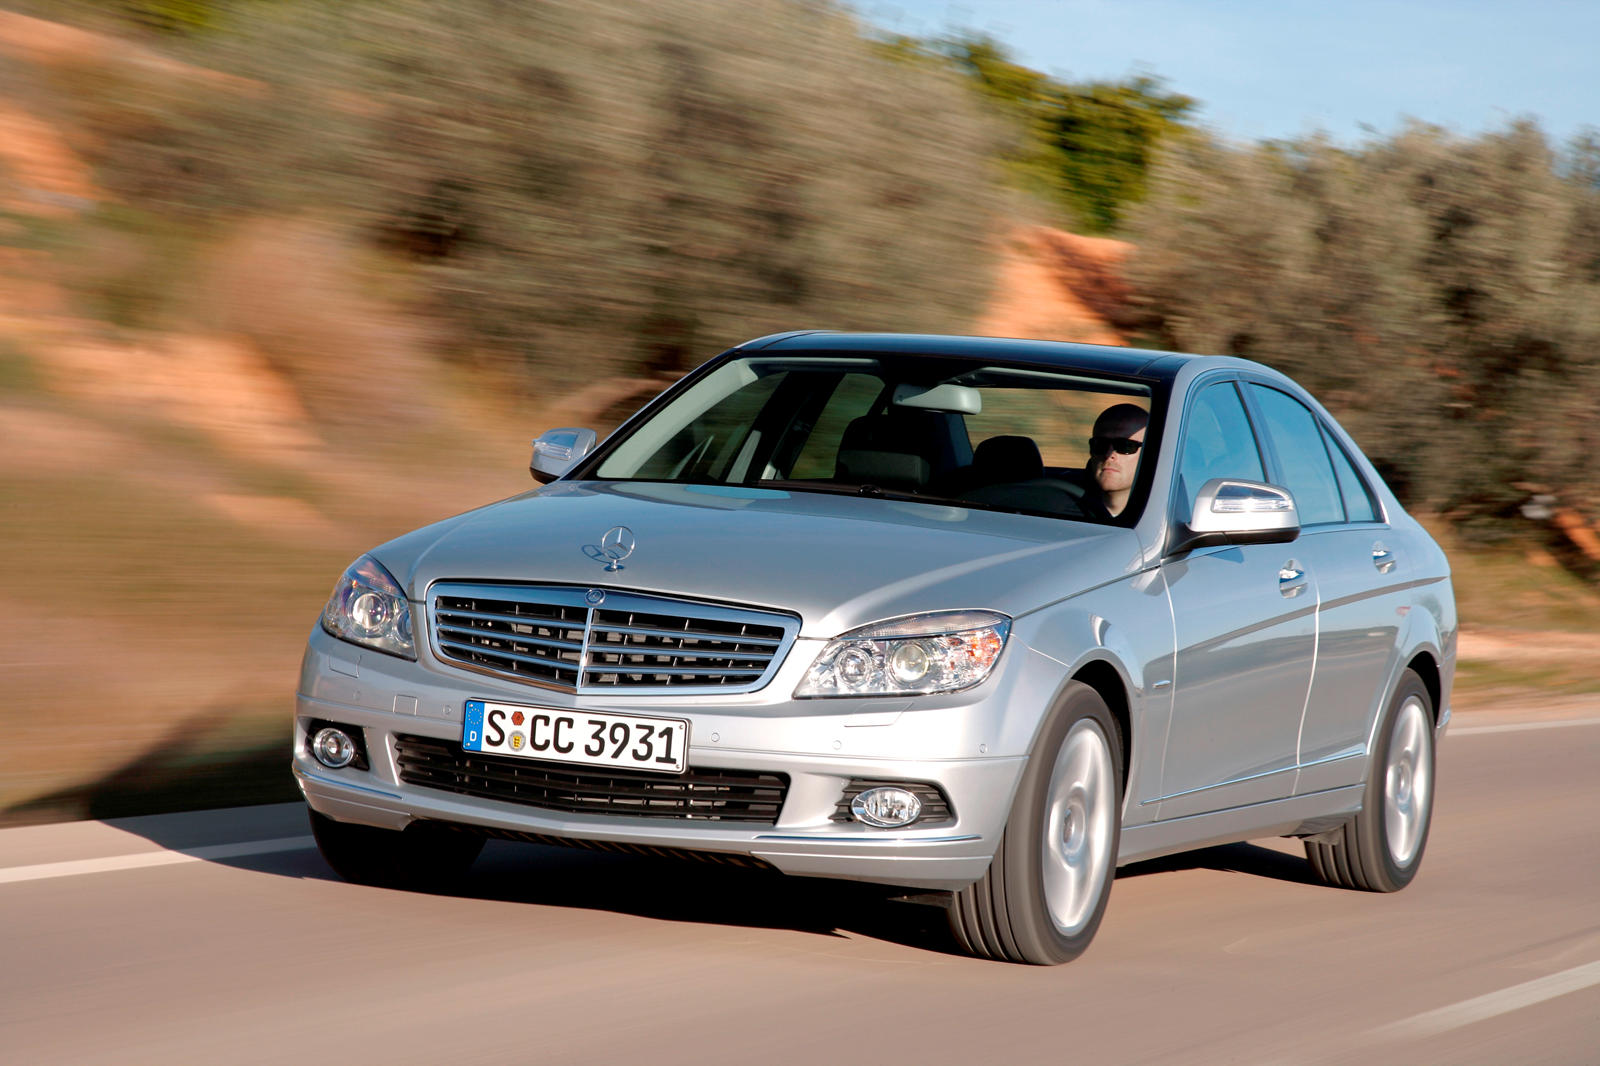 2010 Mercedes-Benz C-Class Reviews, Insights, and Specs